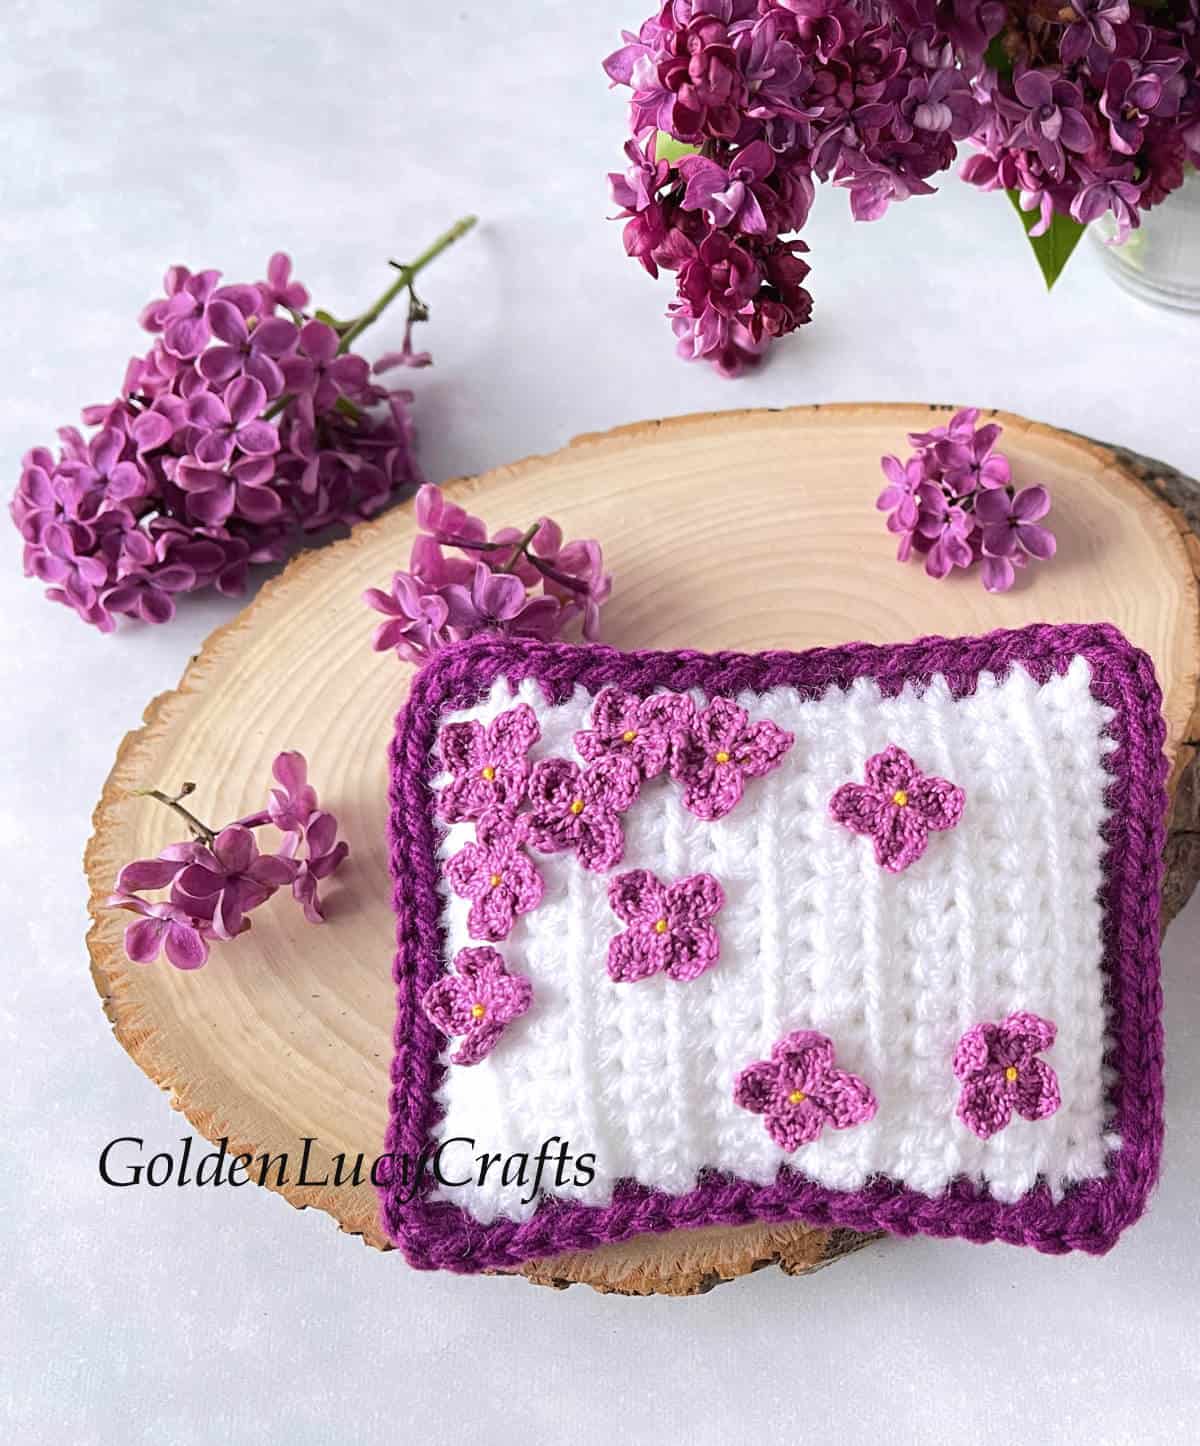 Crochet mini pillow or pincushion embellished with crocheted lilac flowers.